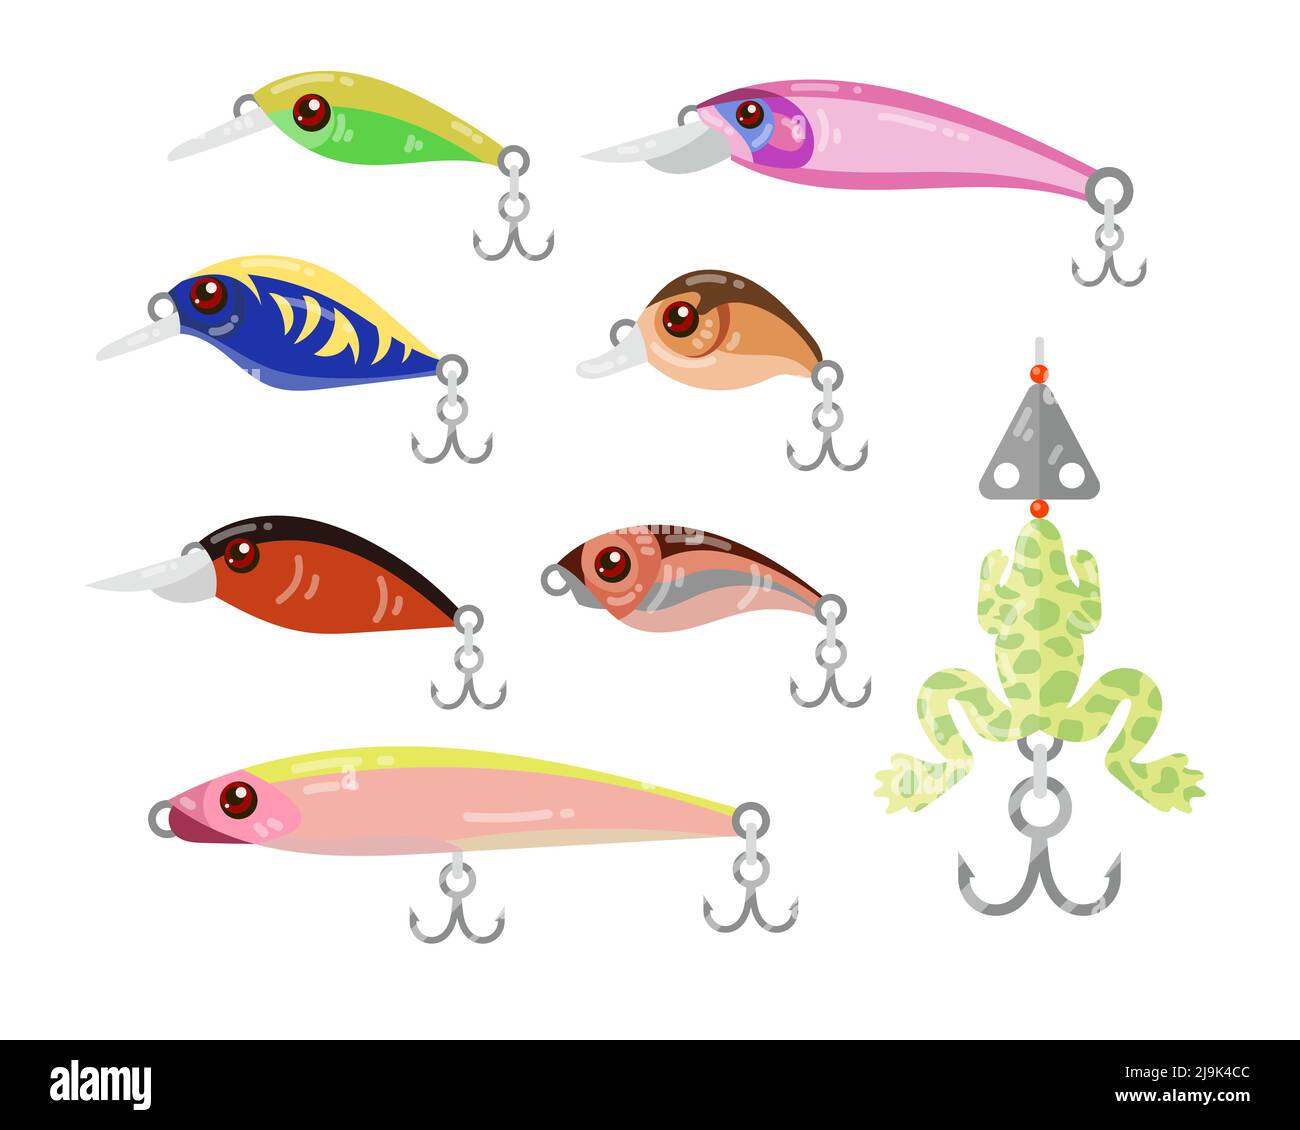 https://c8.alamy.com/comp/2J9K4CC/artificial-fishing-bait-cartoon-illustration-set-fishing-lures-with-hooks-jigs-of-different-shapes-isolated-on-white-background-sport-hobby-gear-2J9K4CC.jpg